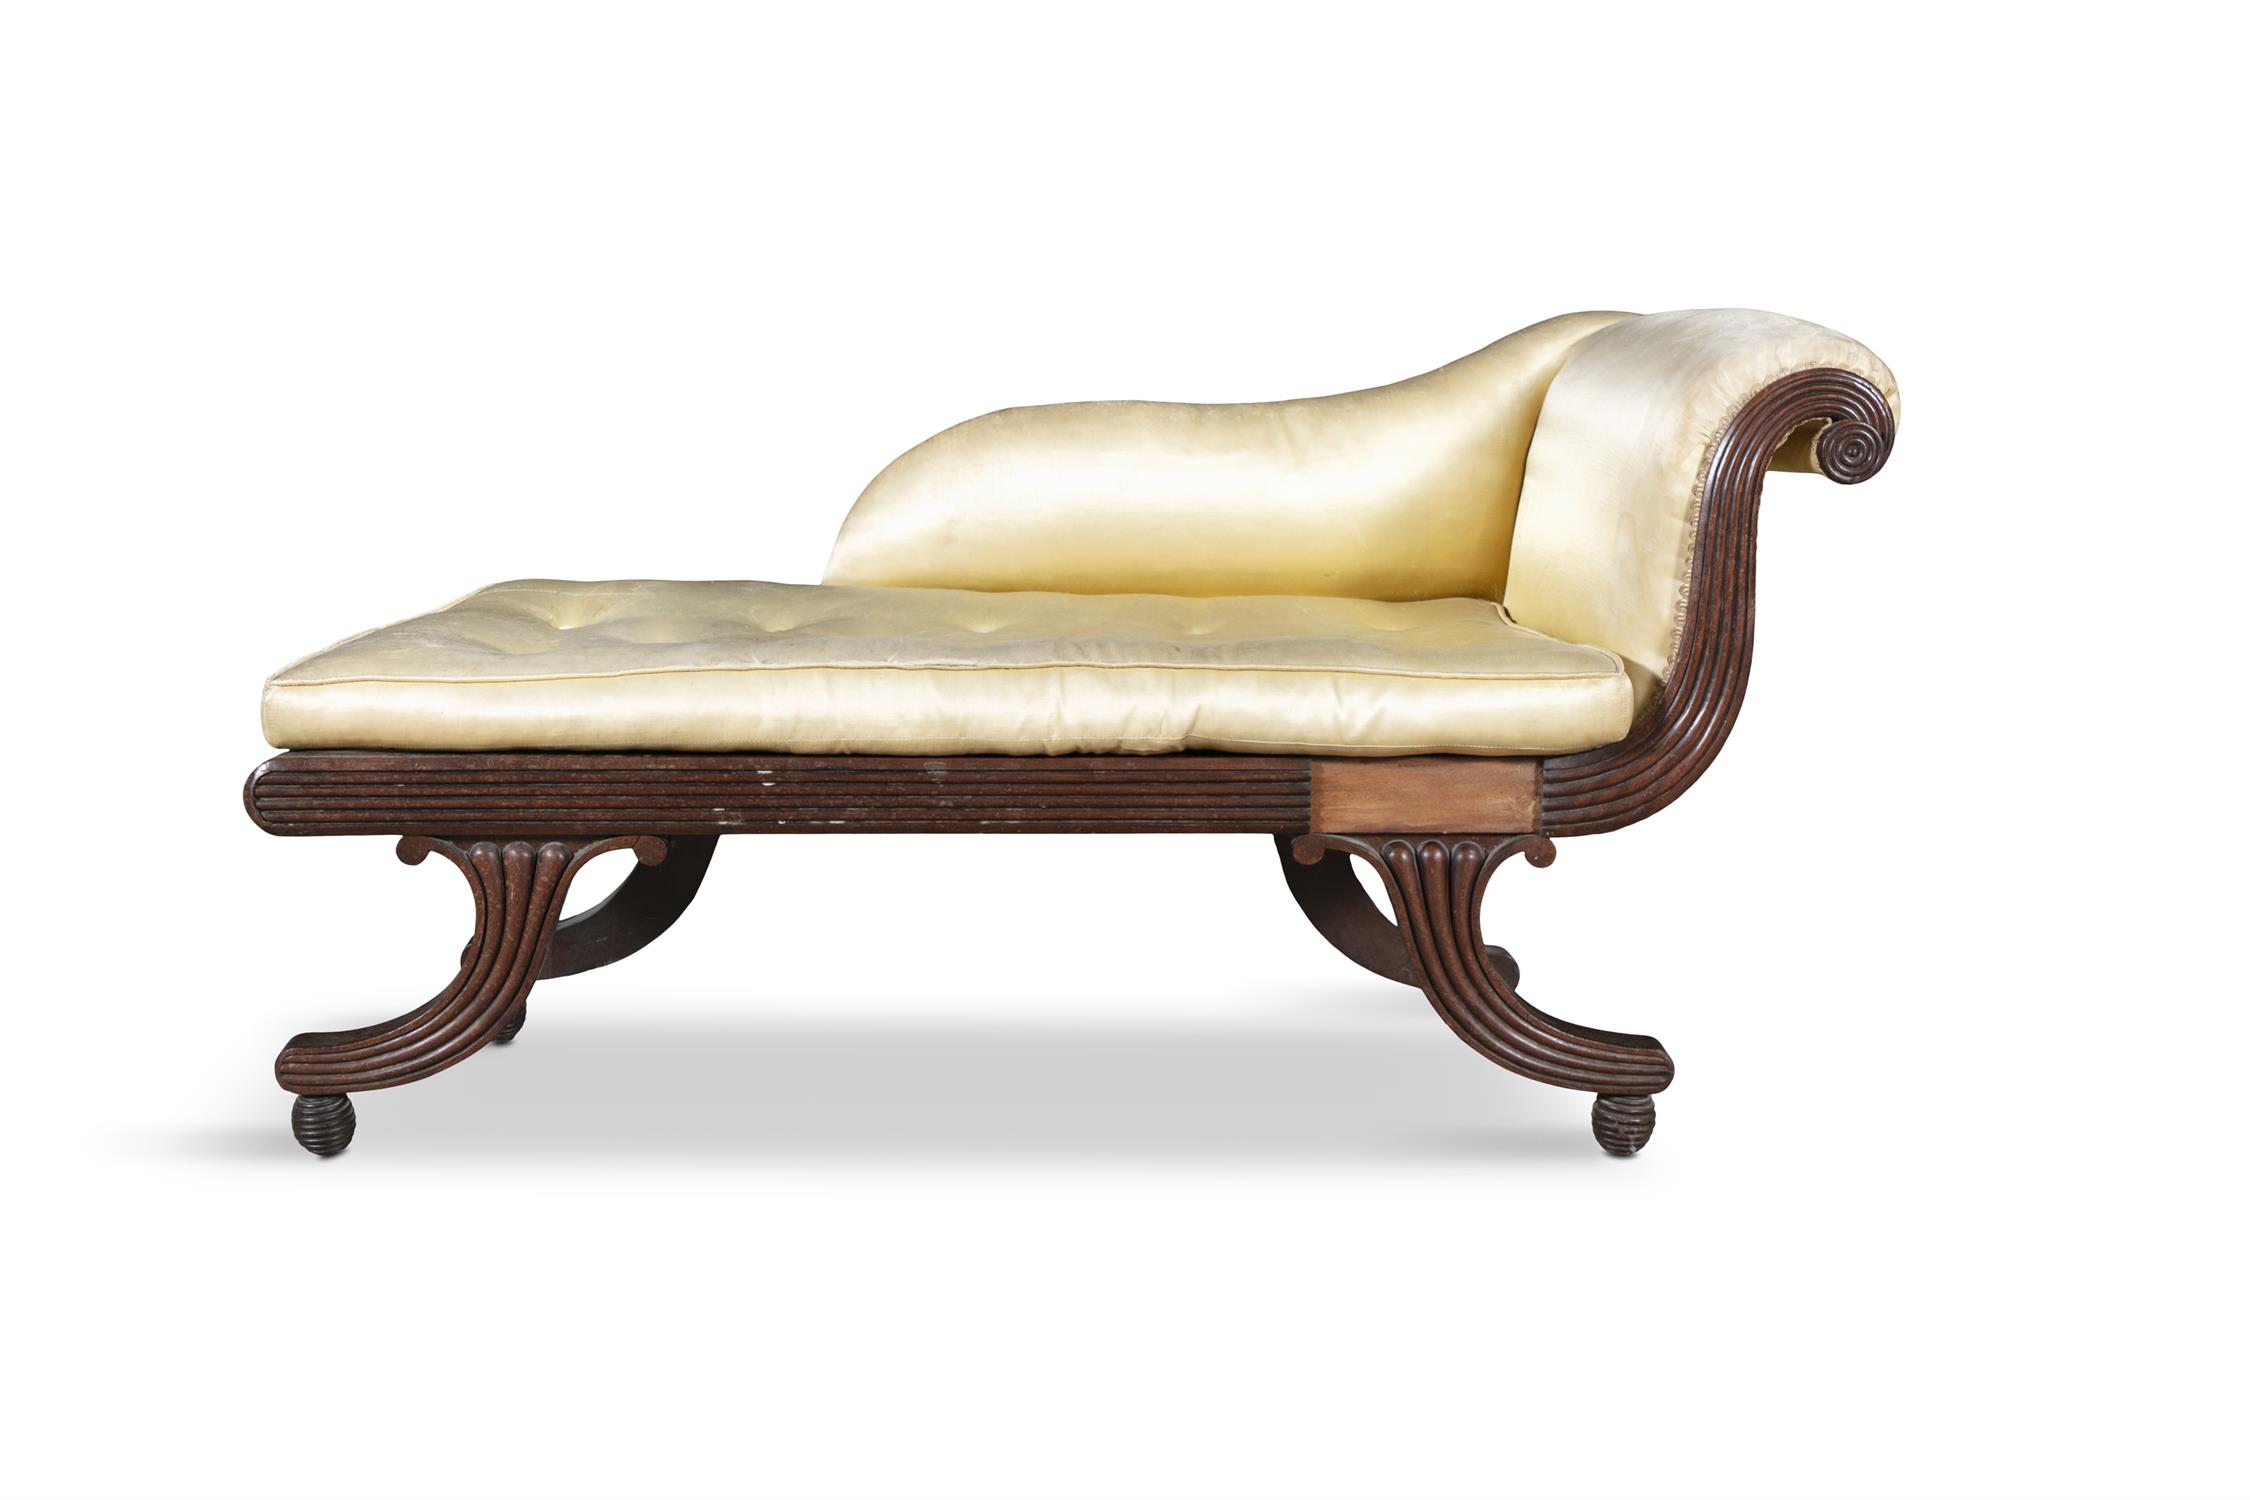 A COMPACT MAHOGANY AND SILK UPHOLSTERED CHAISE LONGUE 19TH CENTURY of classical design with